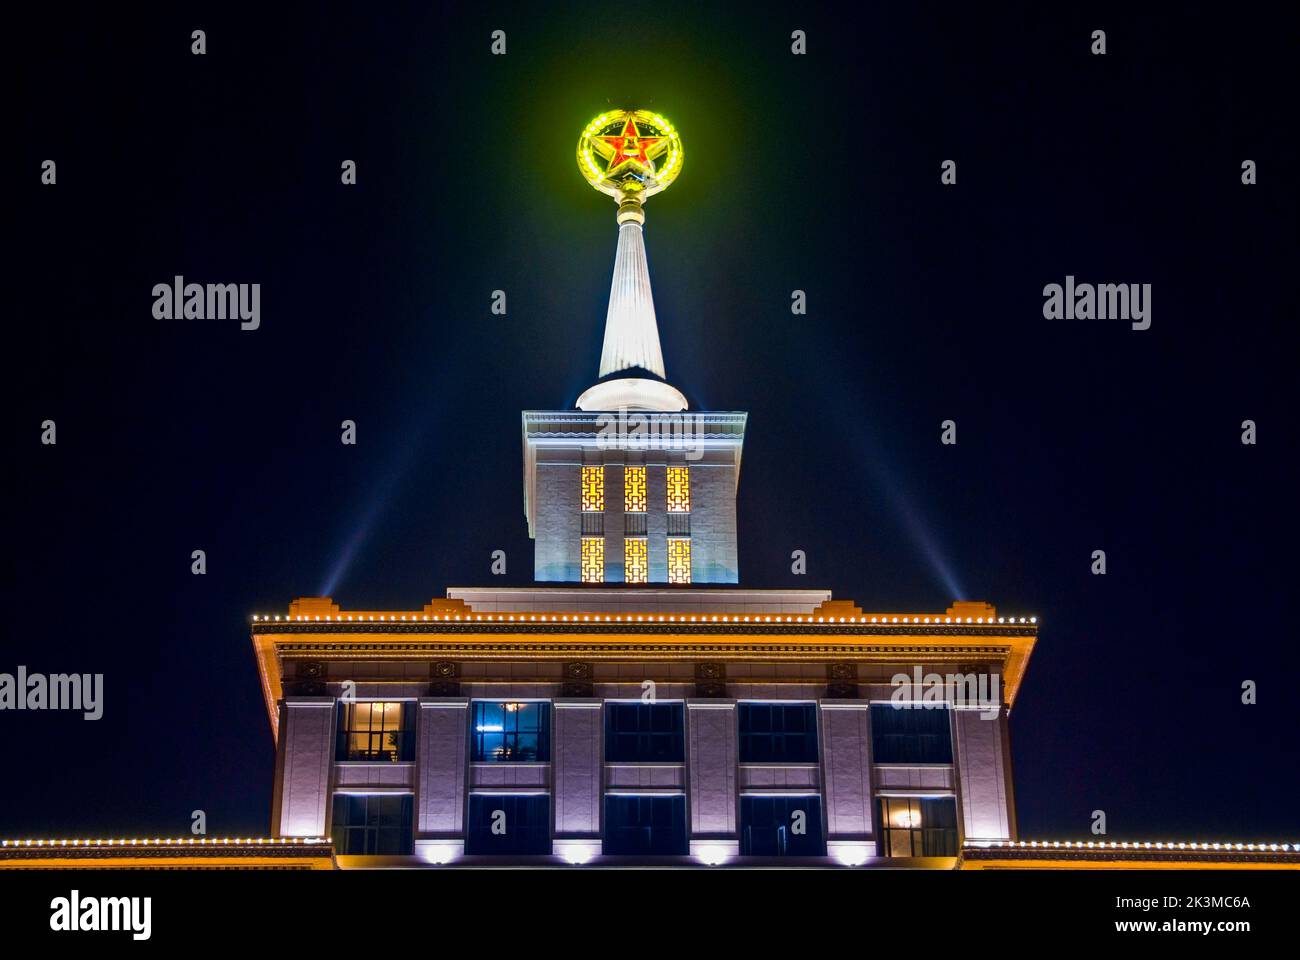 Beijing, CHINA- Monuments, Museums- The Military Museum of Chinese People's Revolution, With Giant Red Star And Aug. 1st Character on Top, Lit up at Night Stock Photo